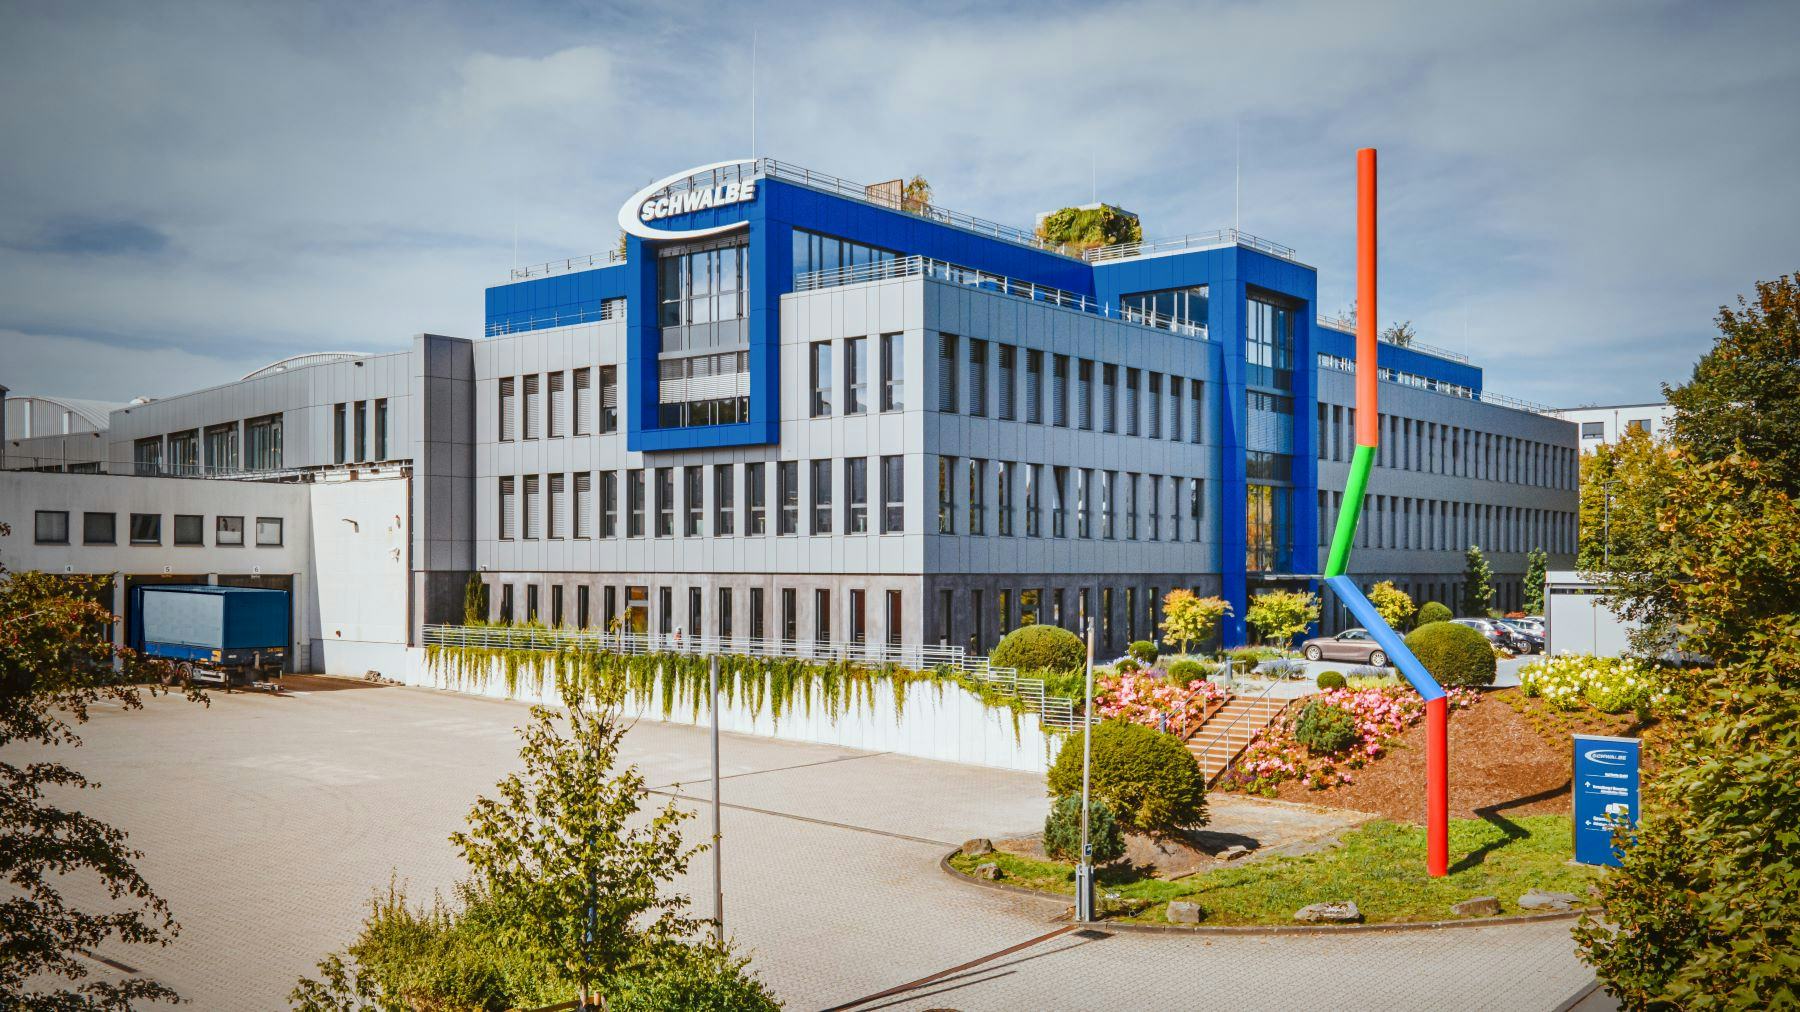 The company headquarters in Reichshof, Germany employs 204 people. – Photo Schwalbe 